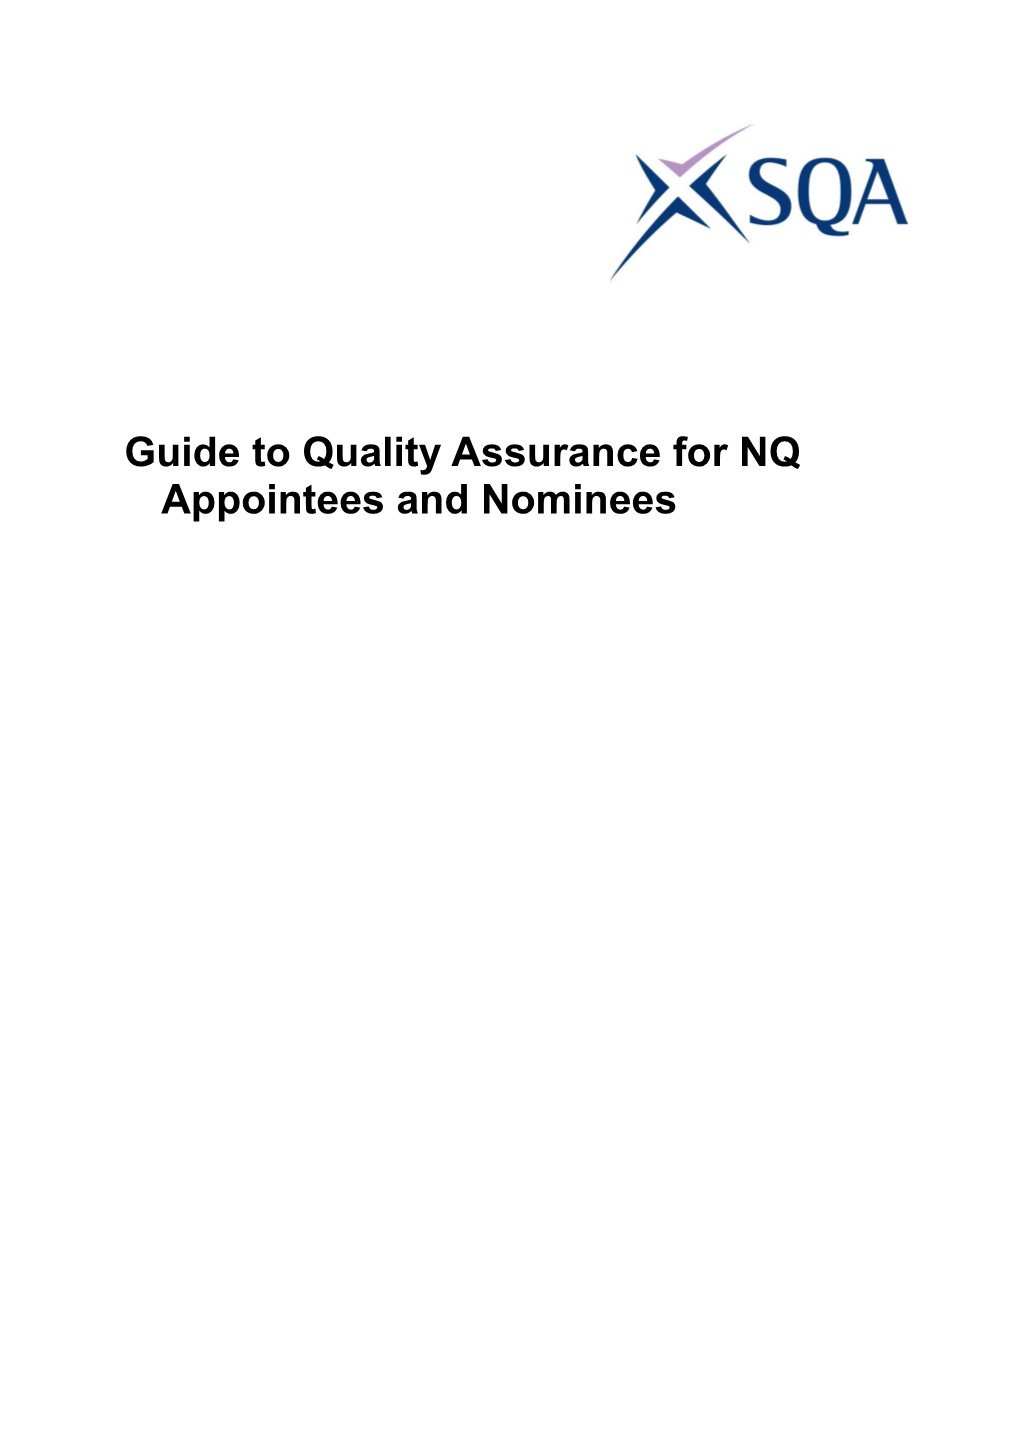 Guide to Quality Assurance for NQ Appointees and Nominees